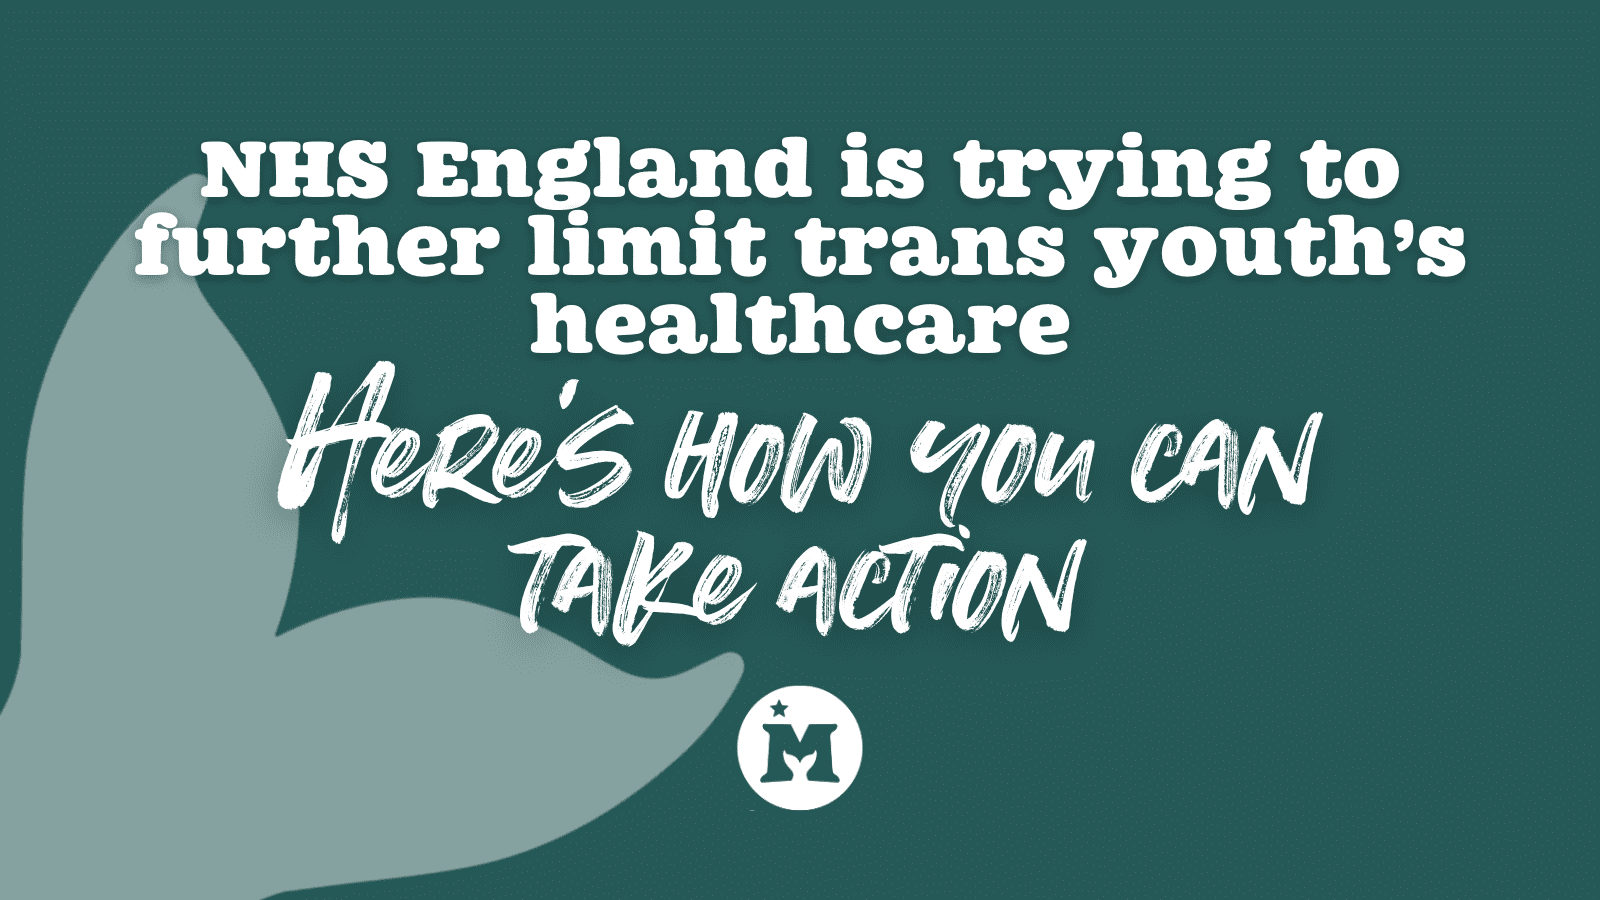 NHS England is trying to further limit trans youth's healthcare: Here's how  you can take action - Mermaids